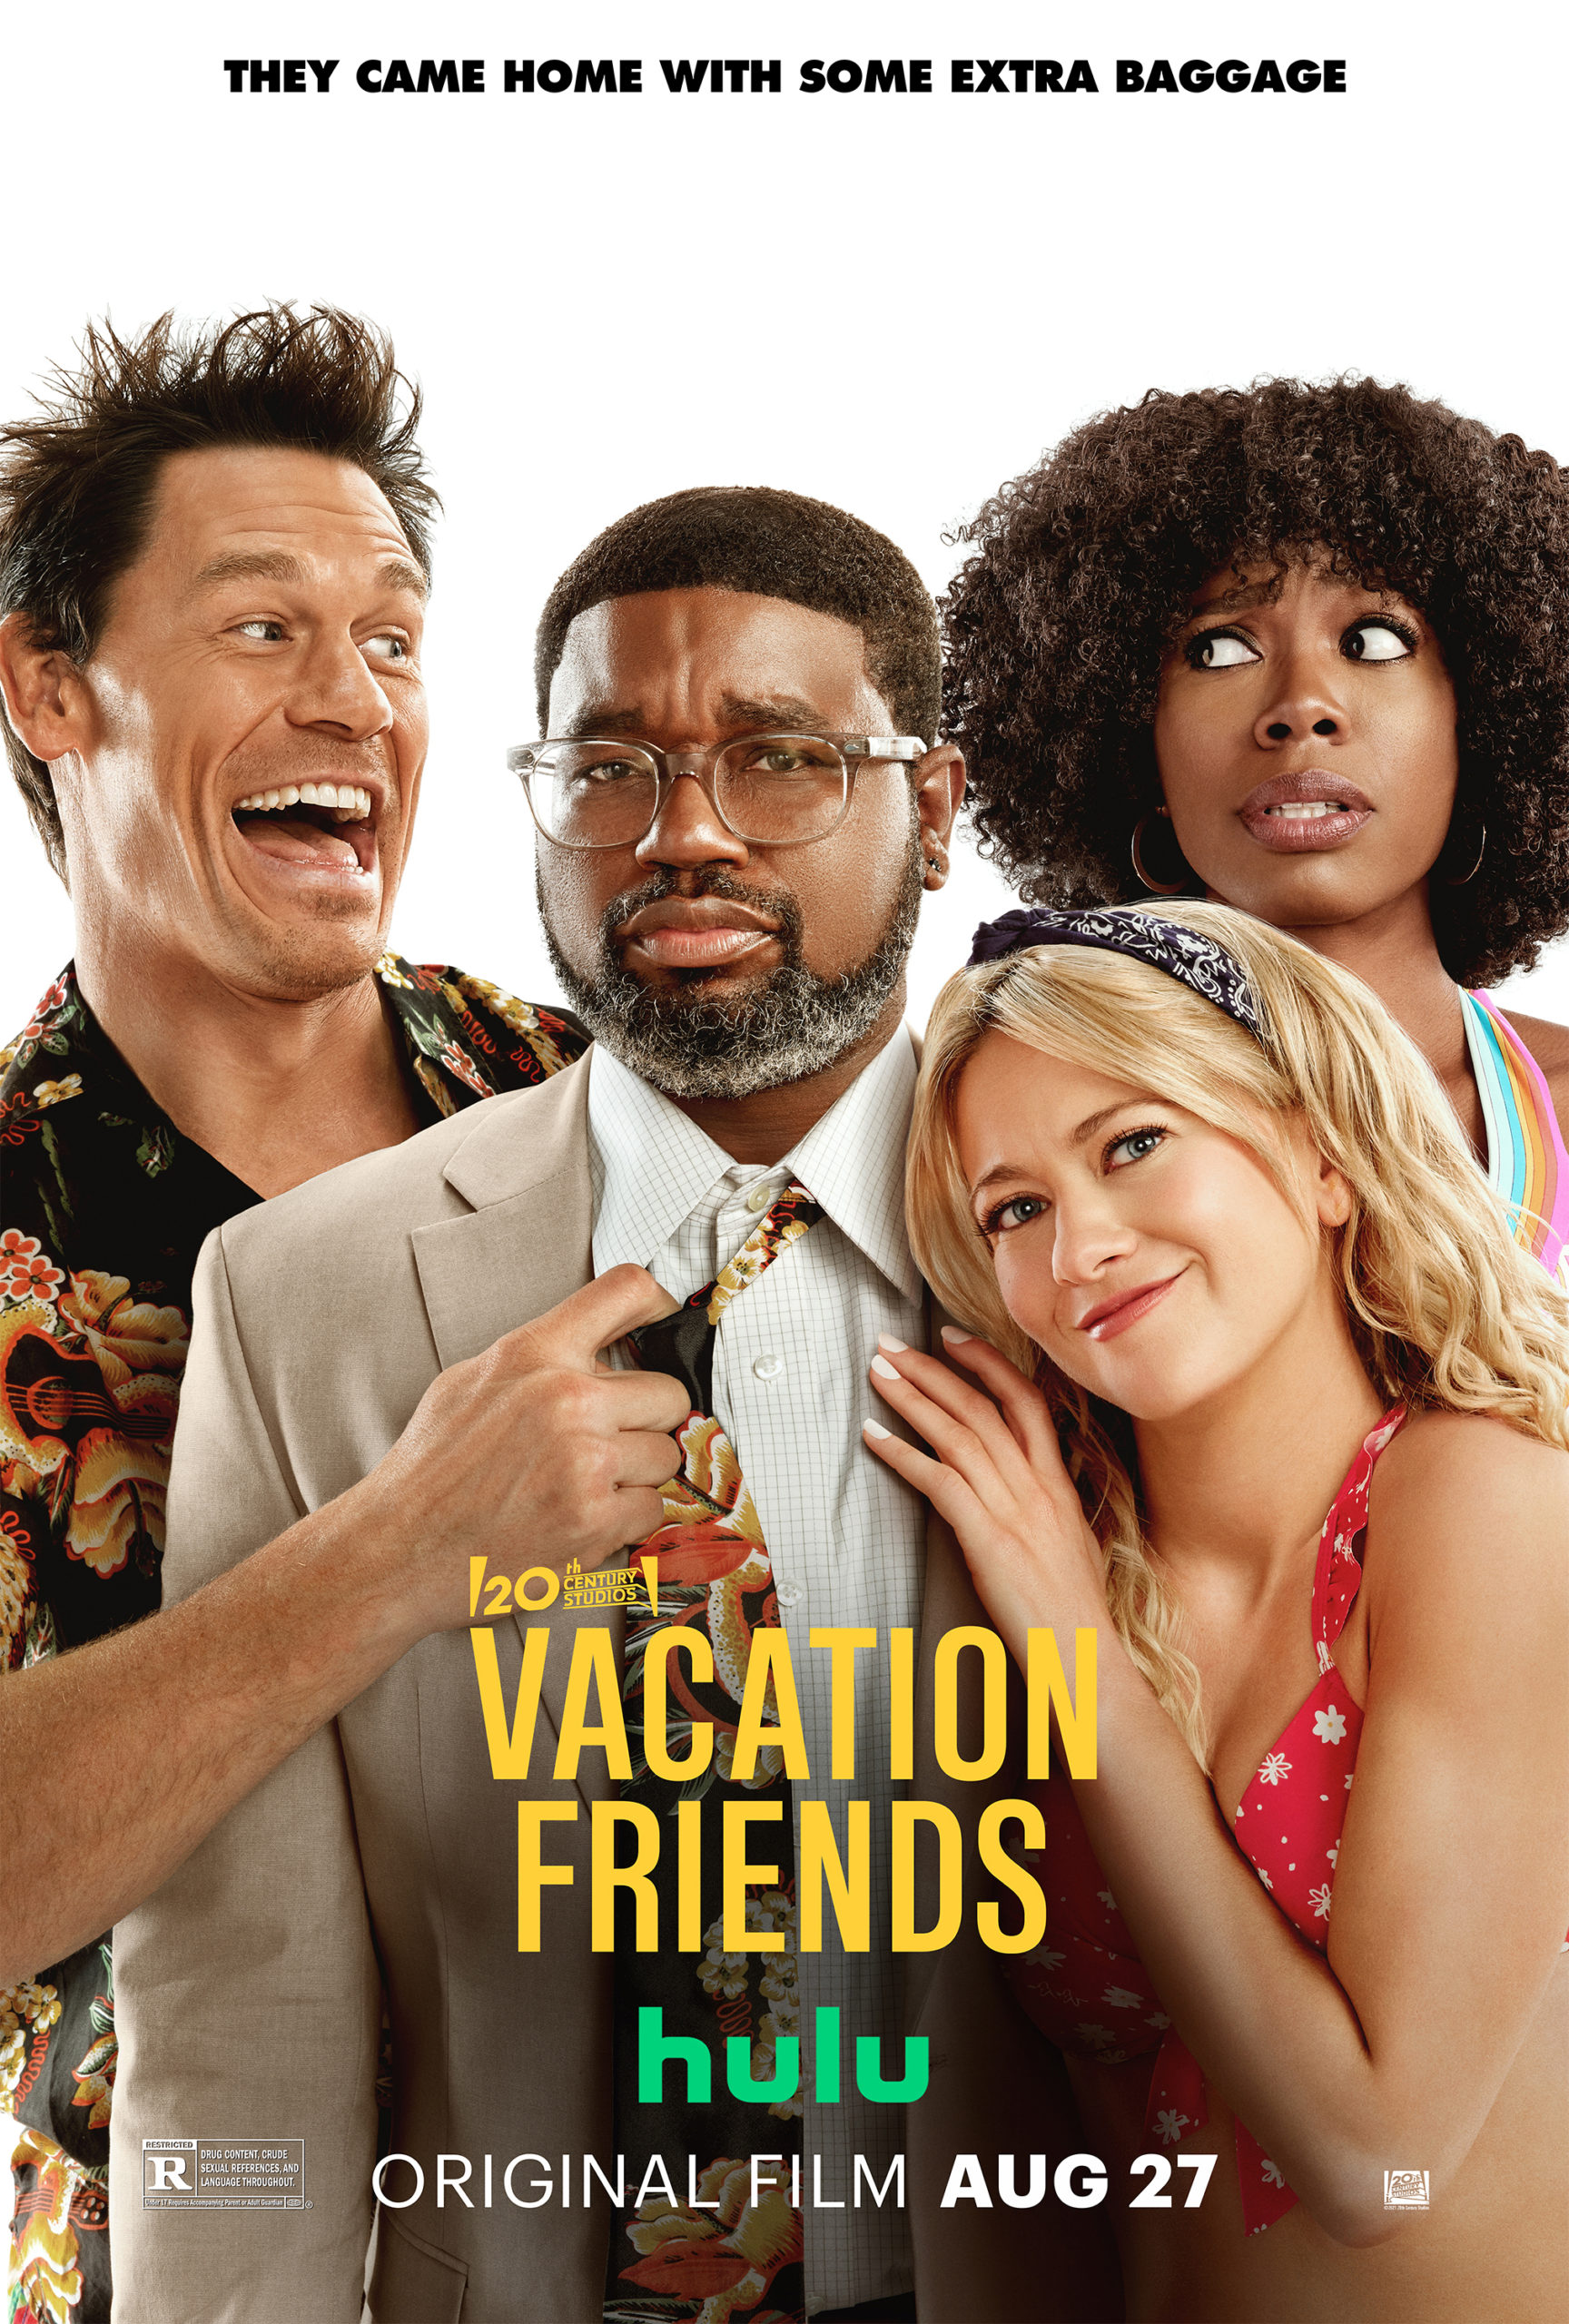 Vacation Friends Poster with John Cena and Lil Rey Howery